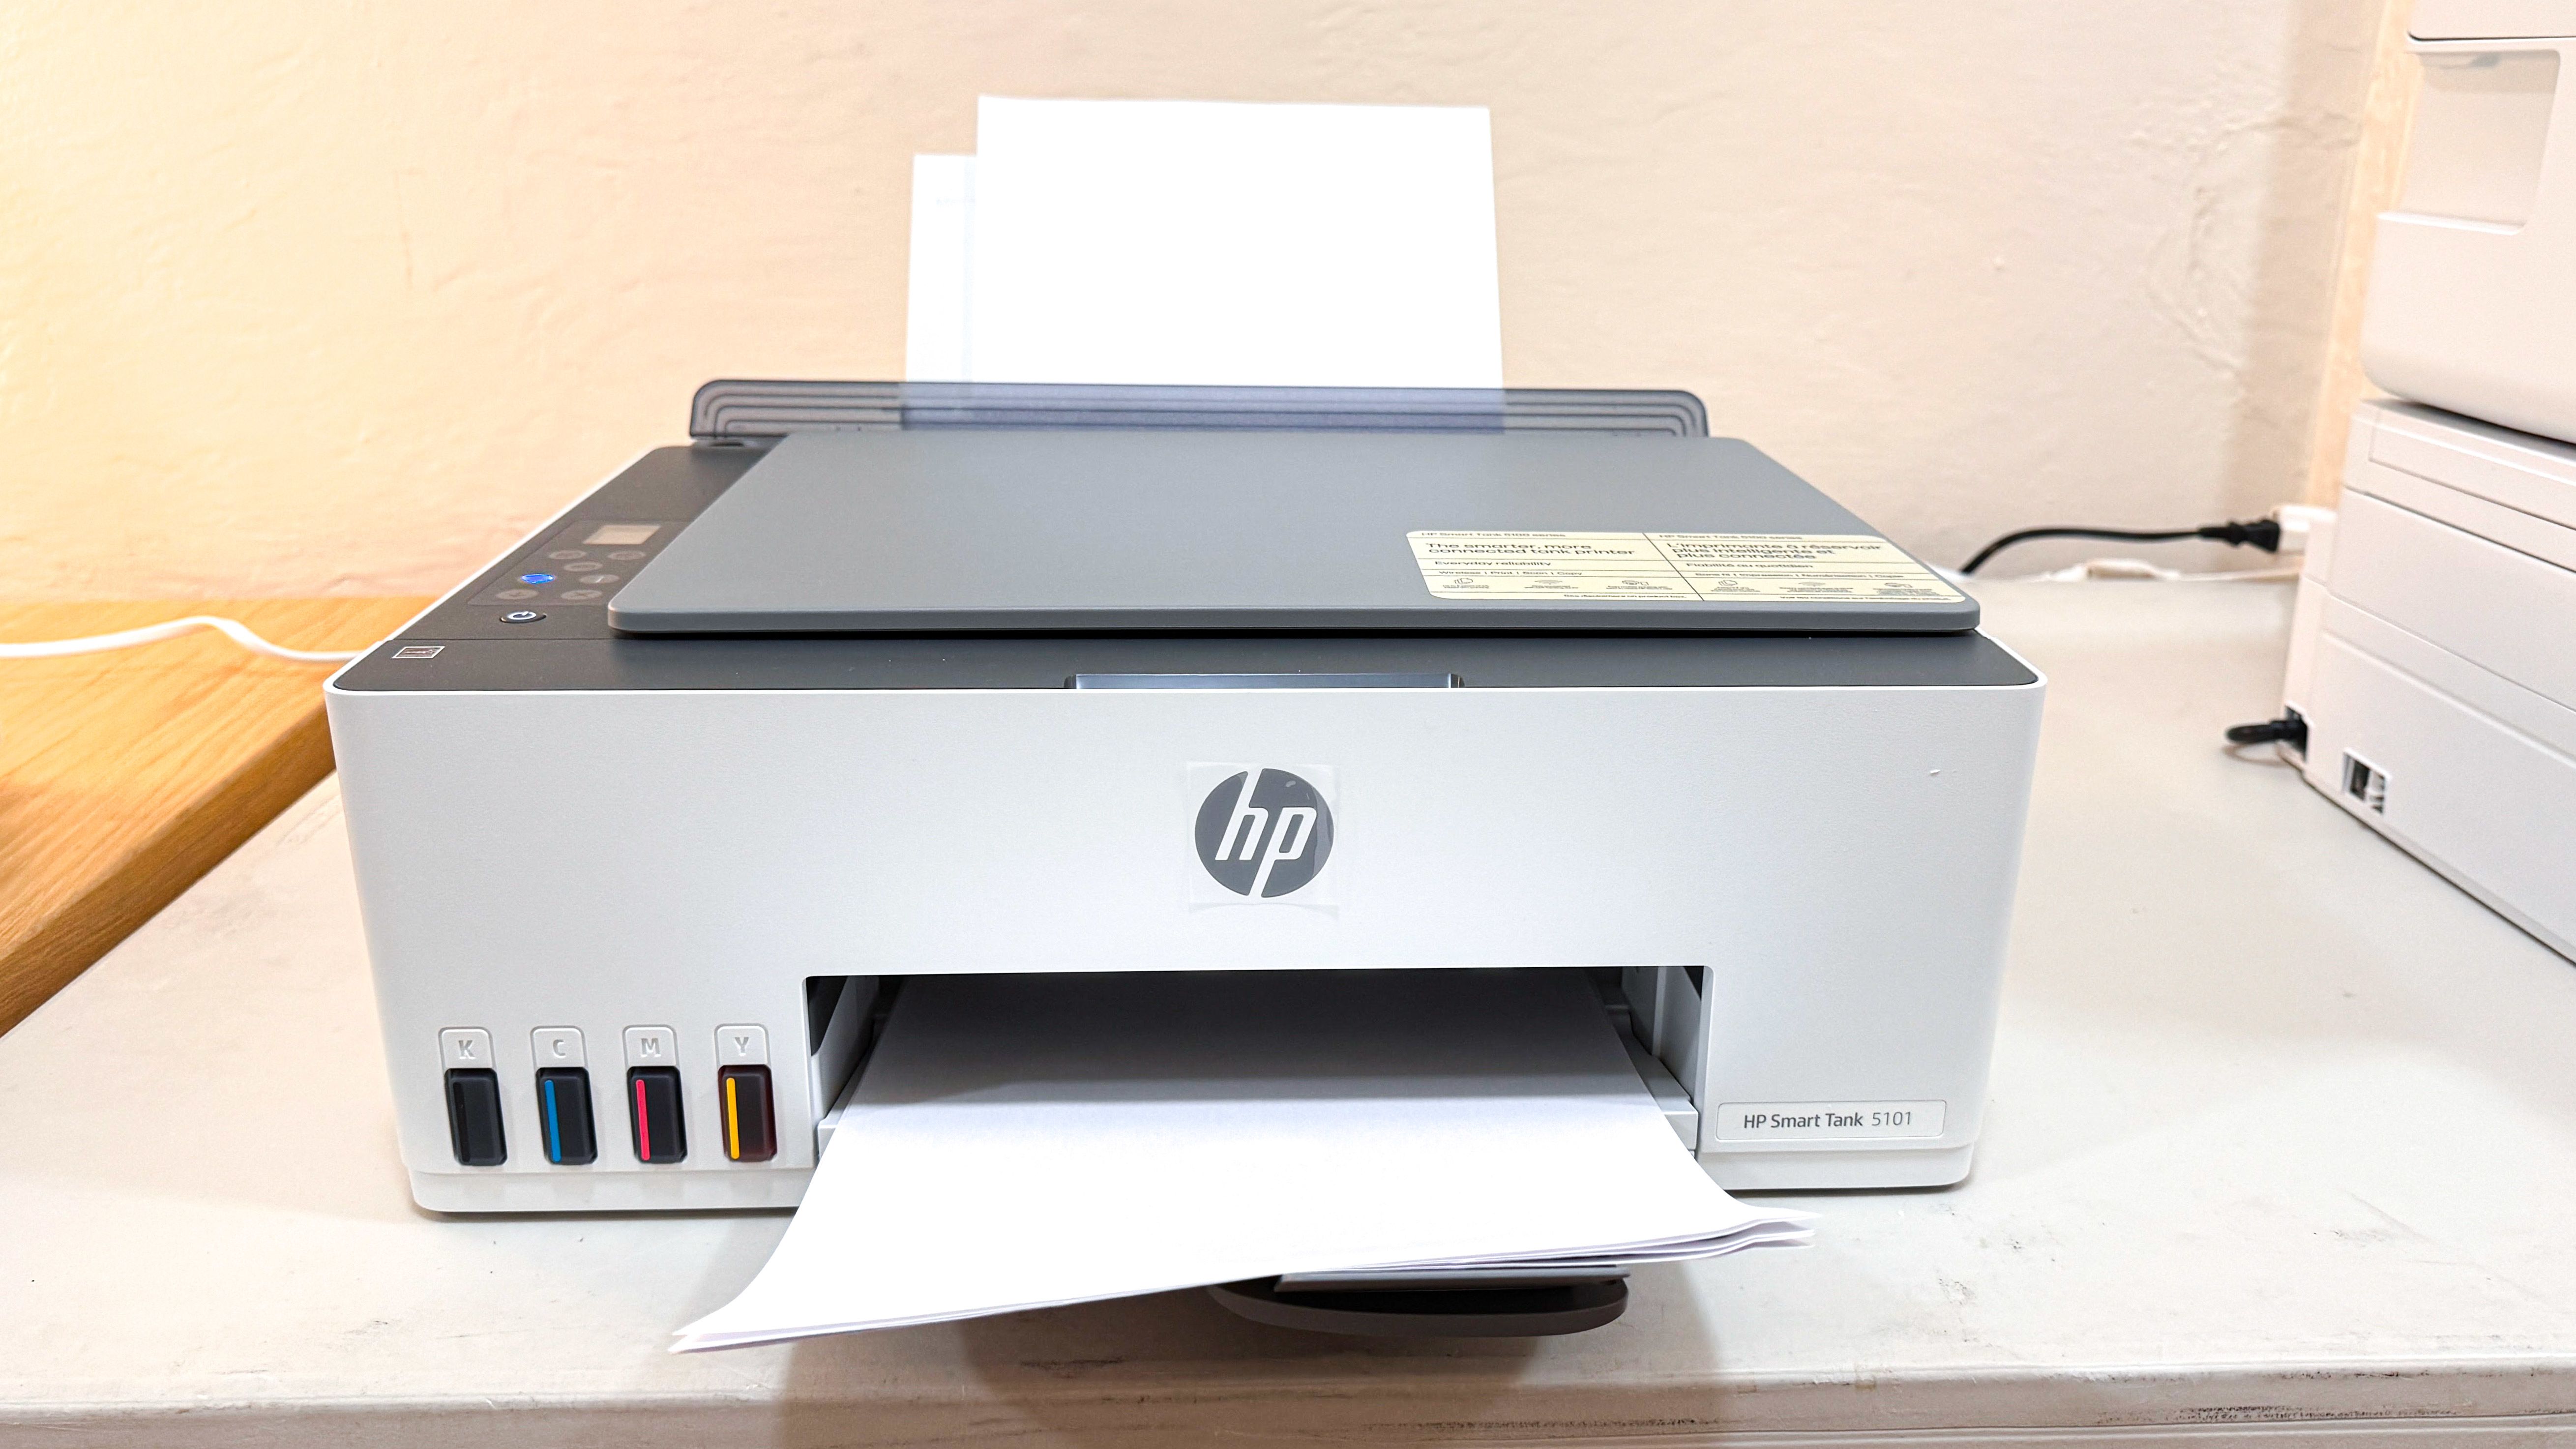 Best Home Printers 2024 - Forbes Vetted